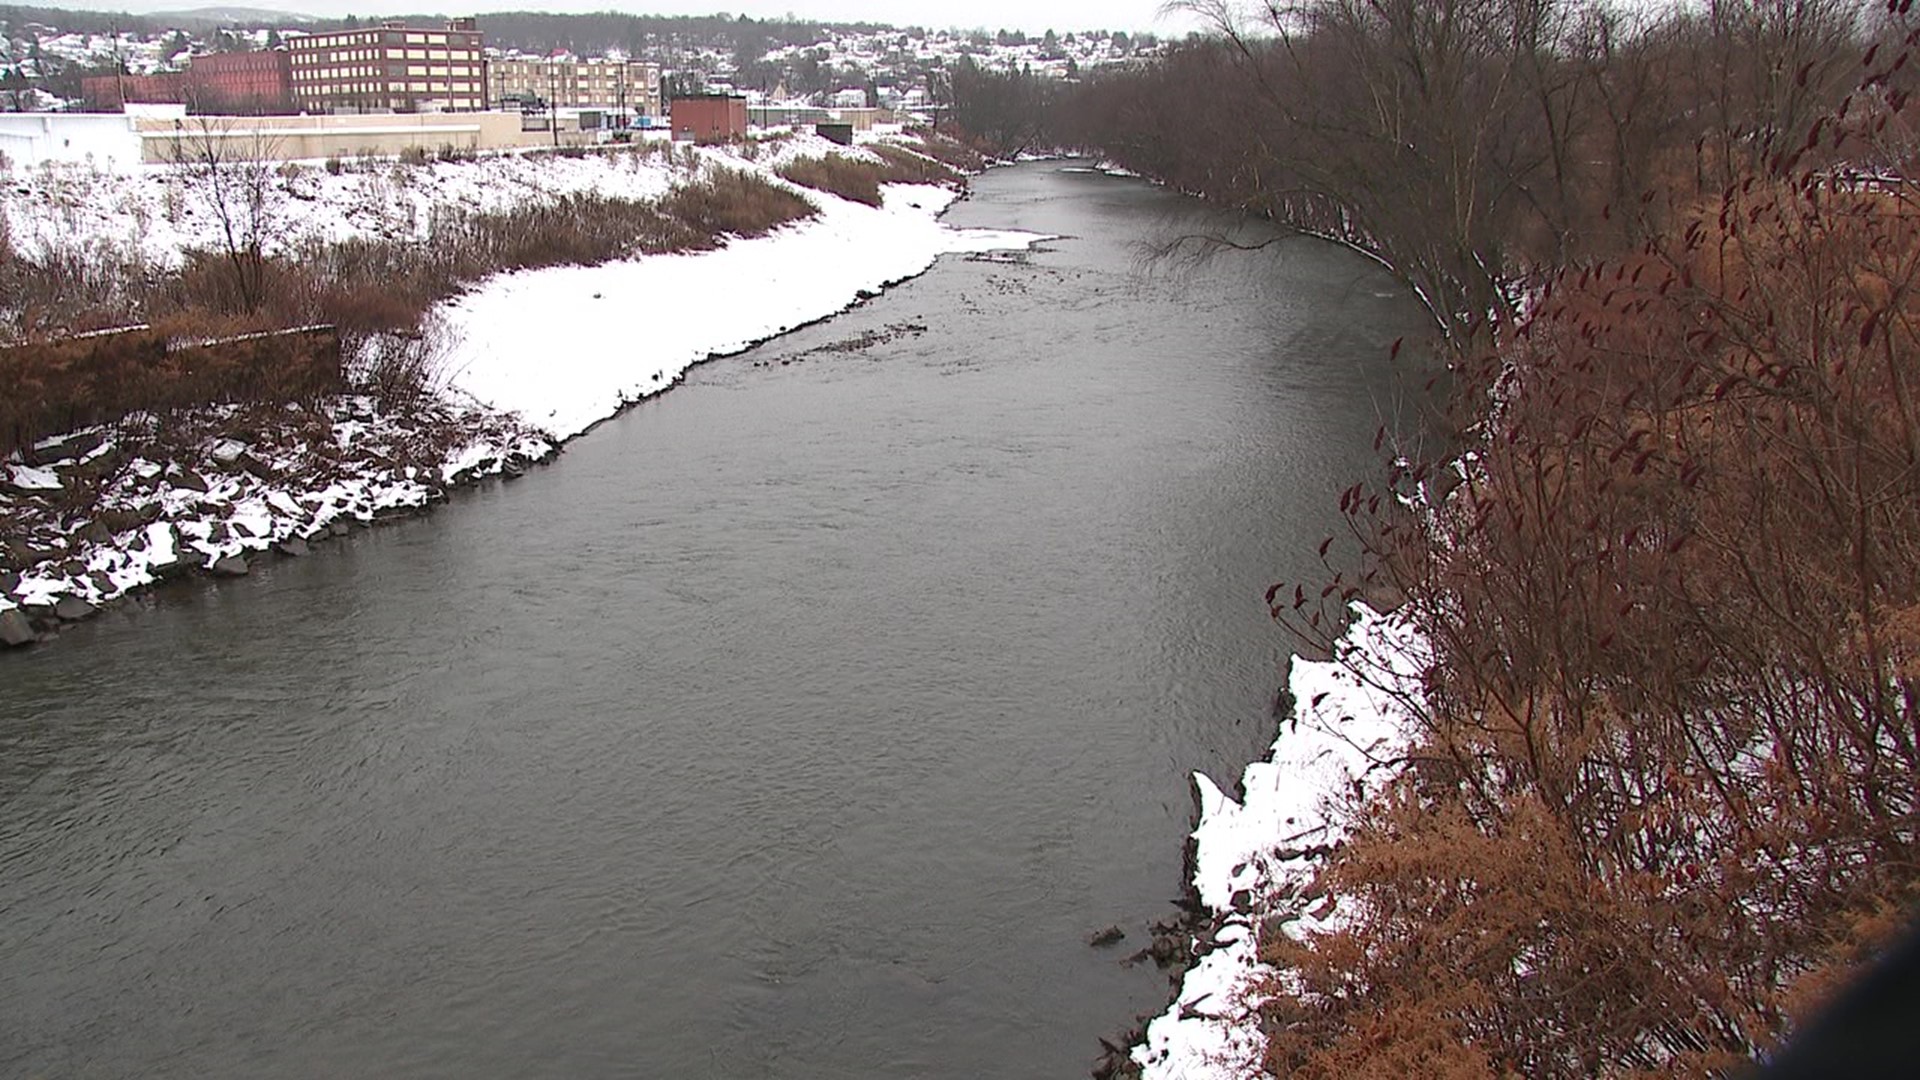 With heavy rain in the forecast, Scranton officials say they are ready if the river starts to rise.